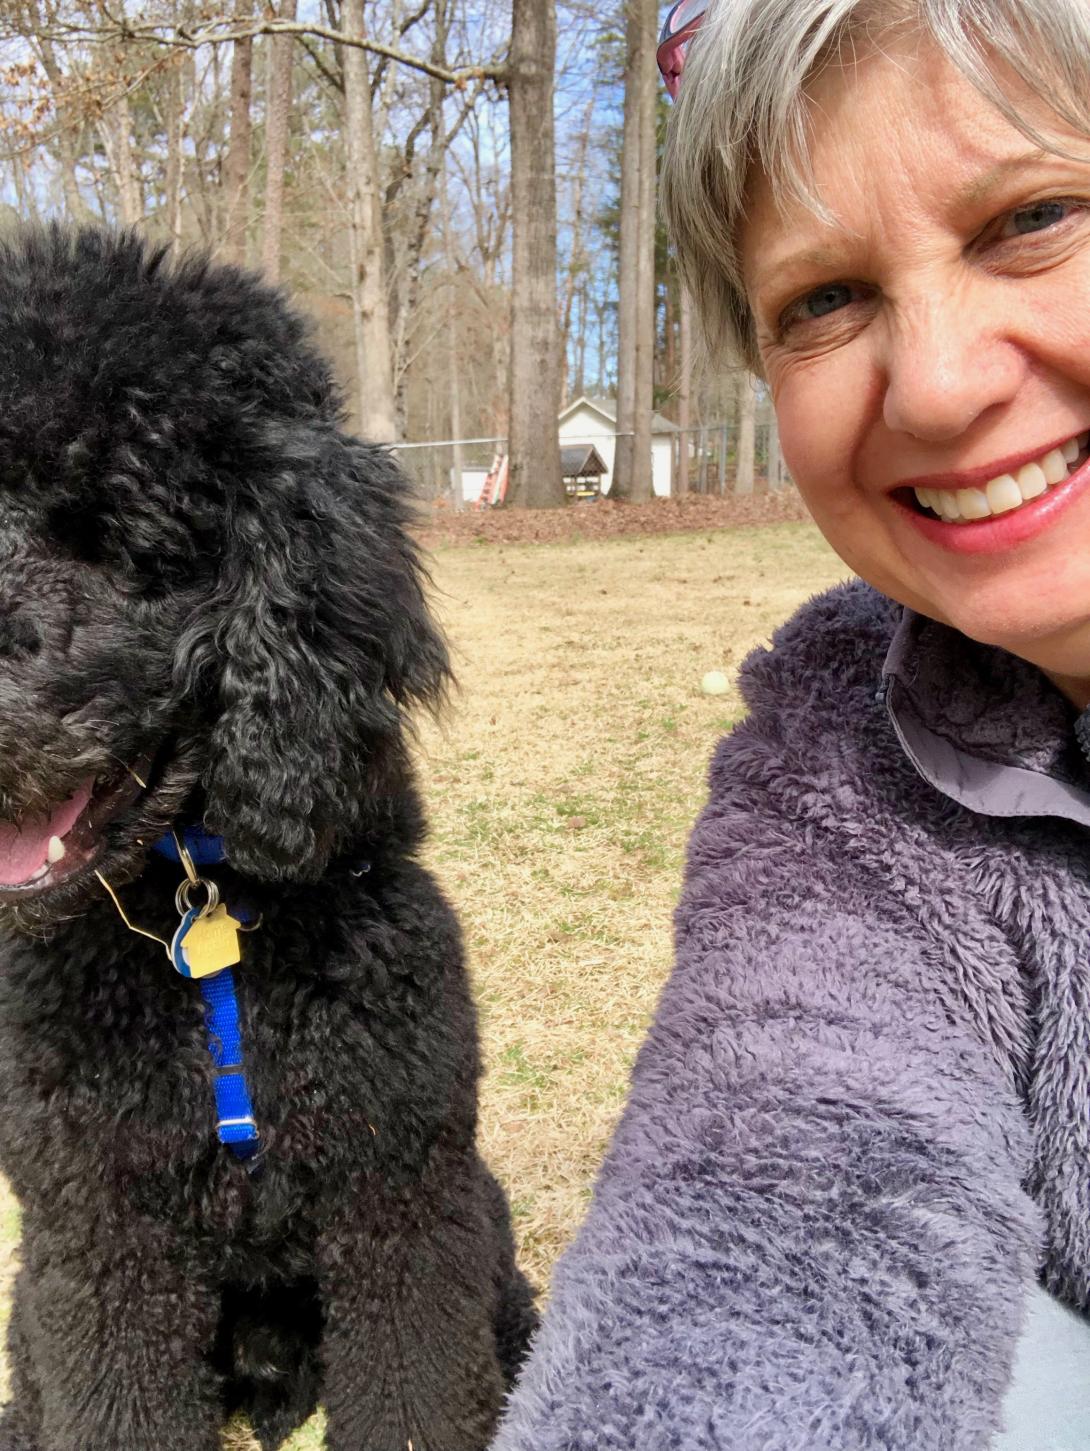 Kathy Jennings takes a selfie outside with her black poodle puppy Cody.